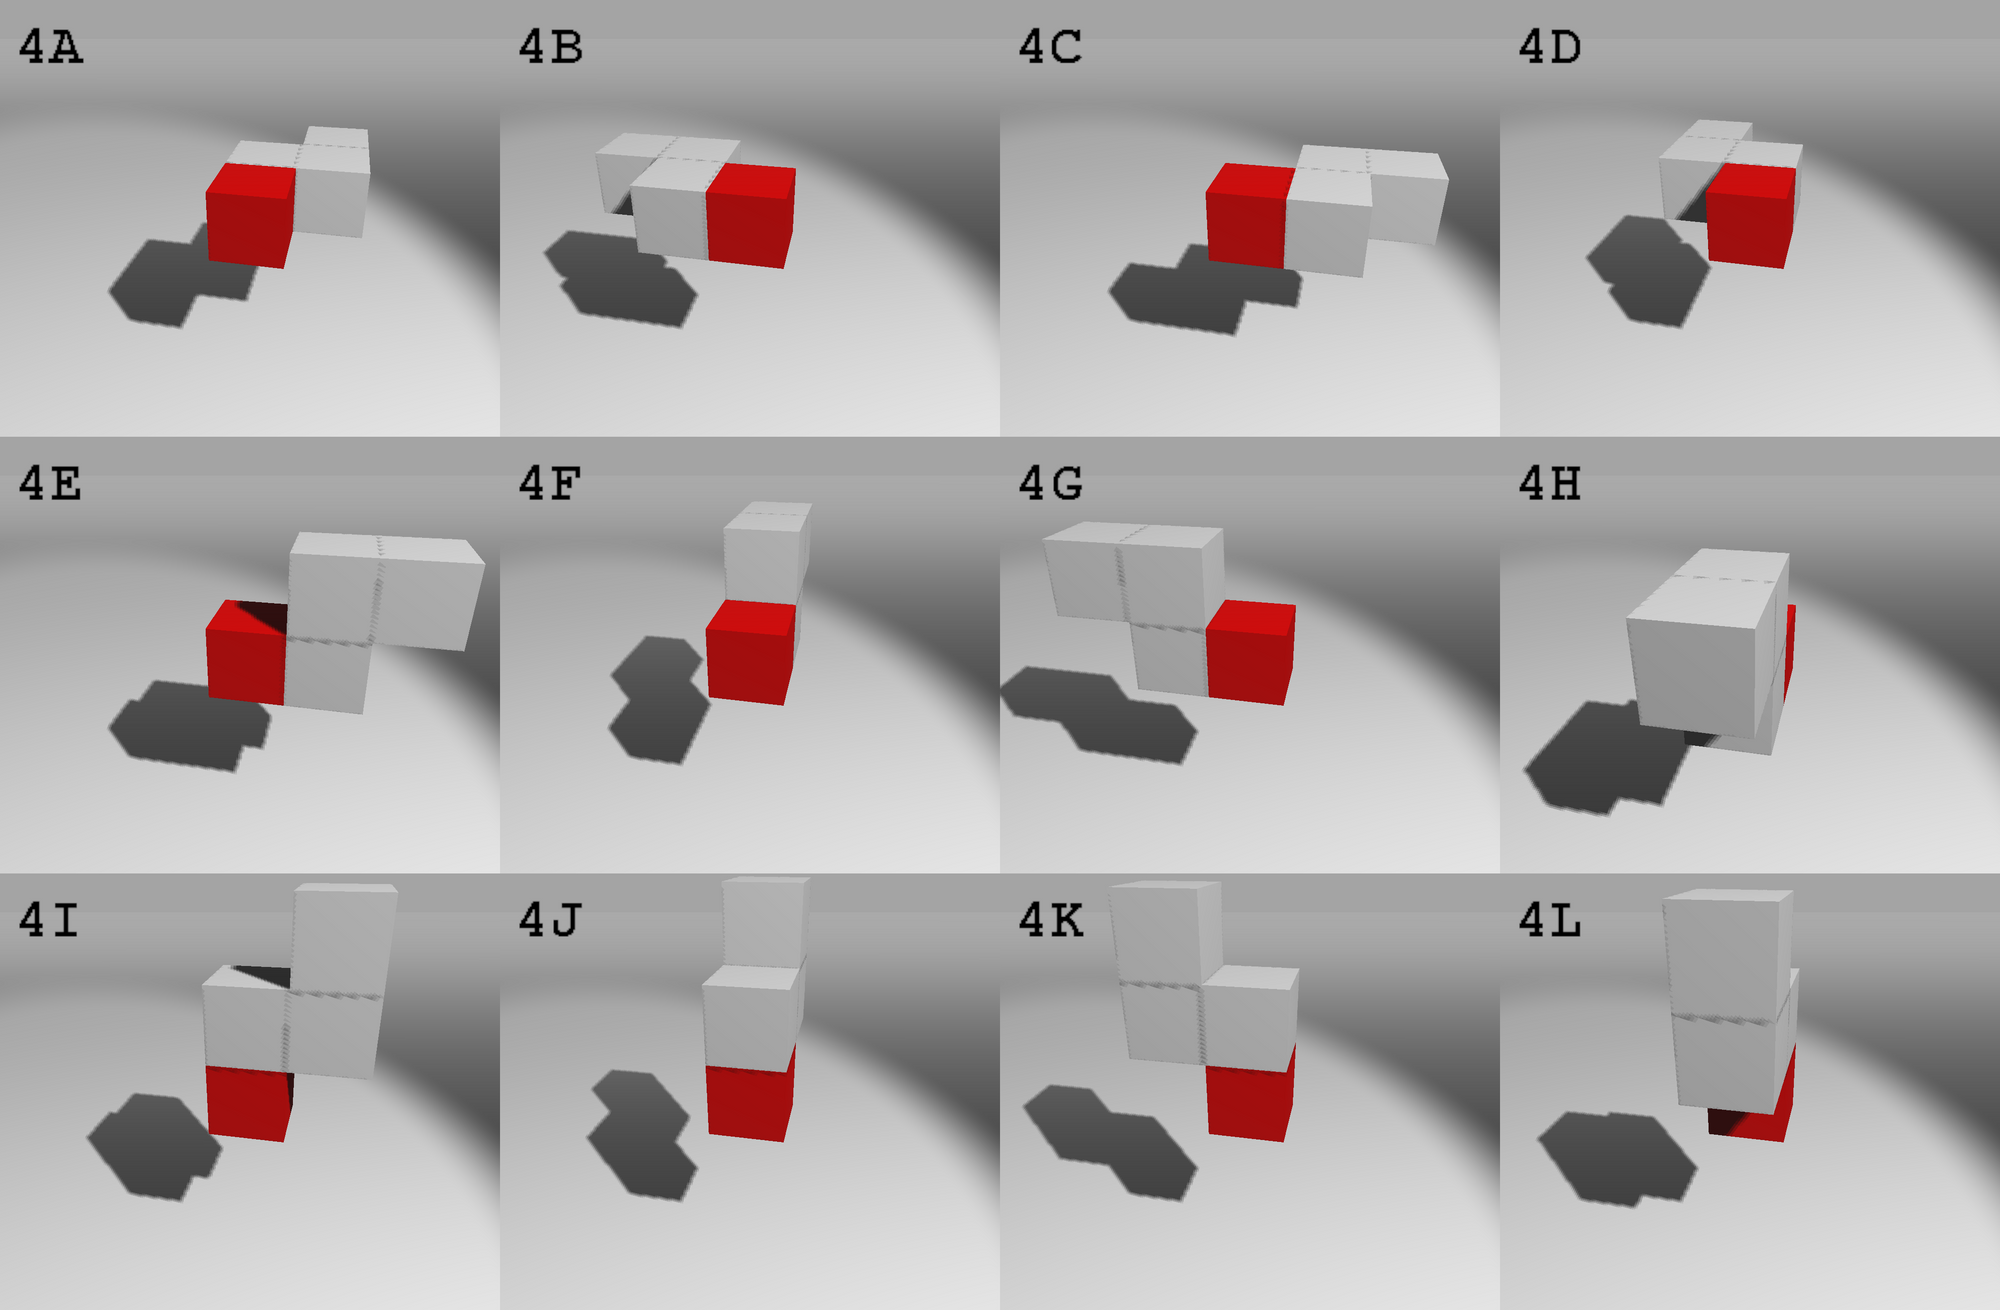 Solving the Soma cube in 3D